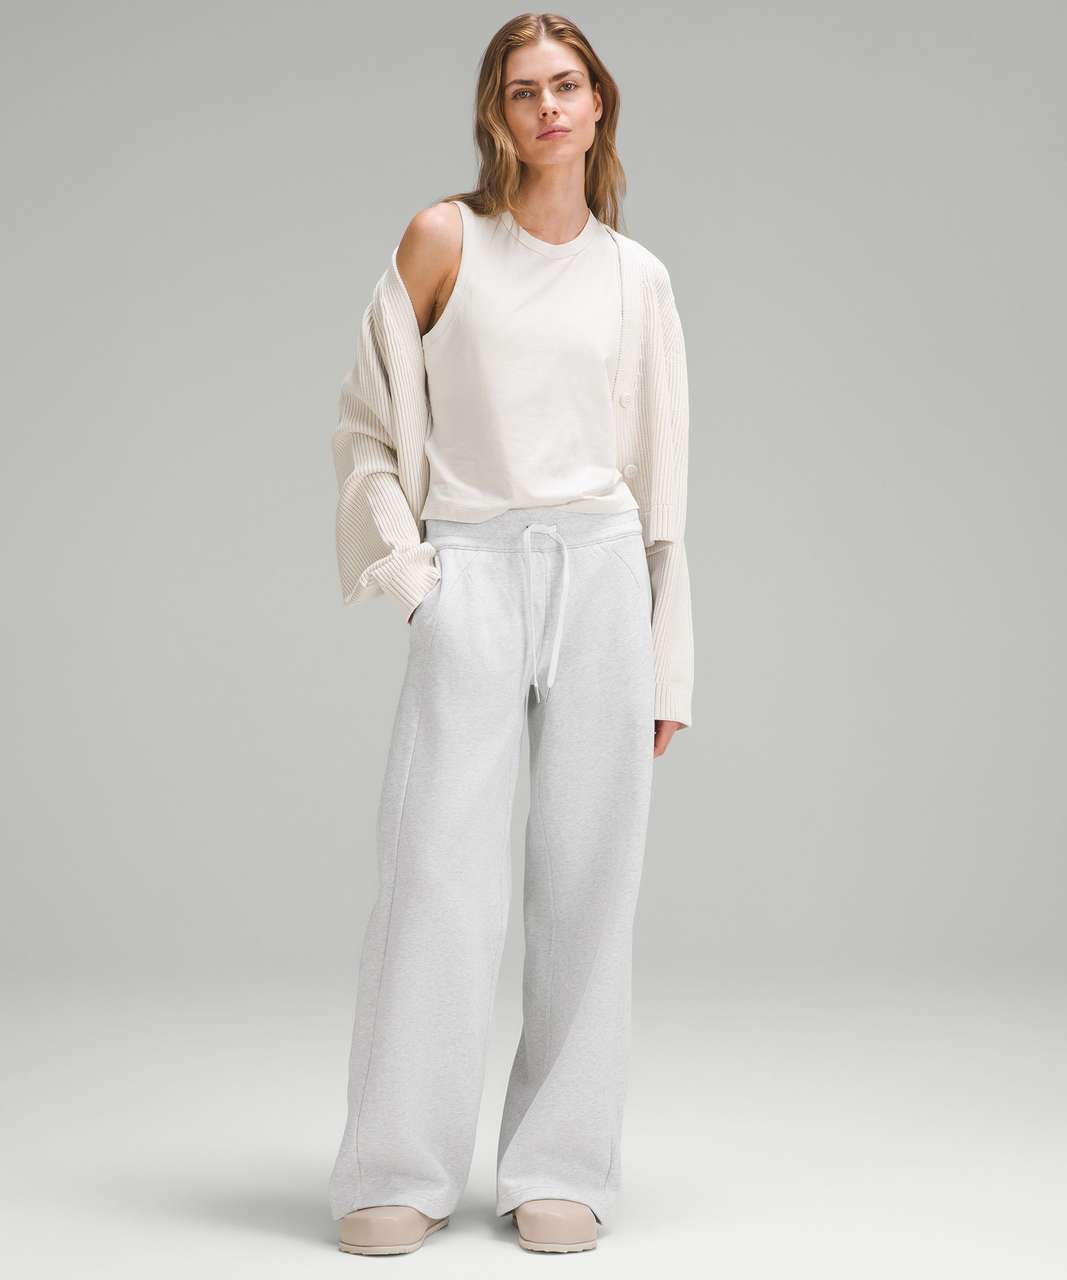 Lululemon Wide Leg Pants Gray Size 6 - $77 (39% Off Retail) - From